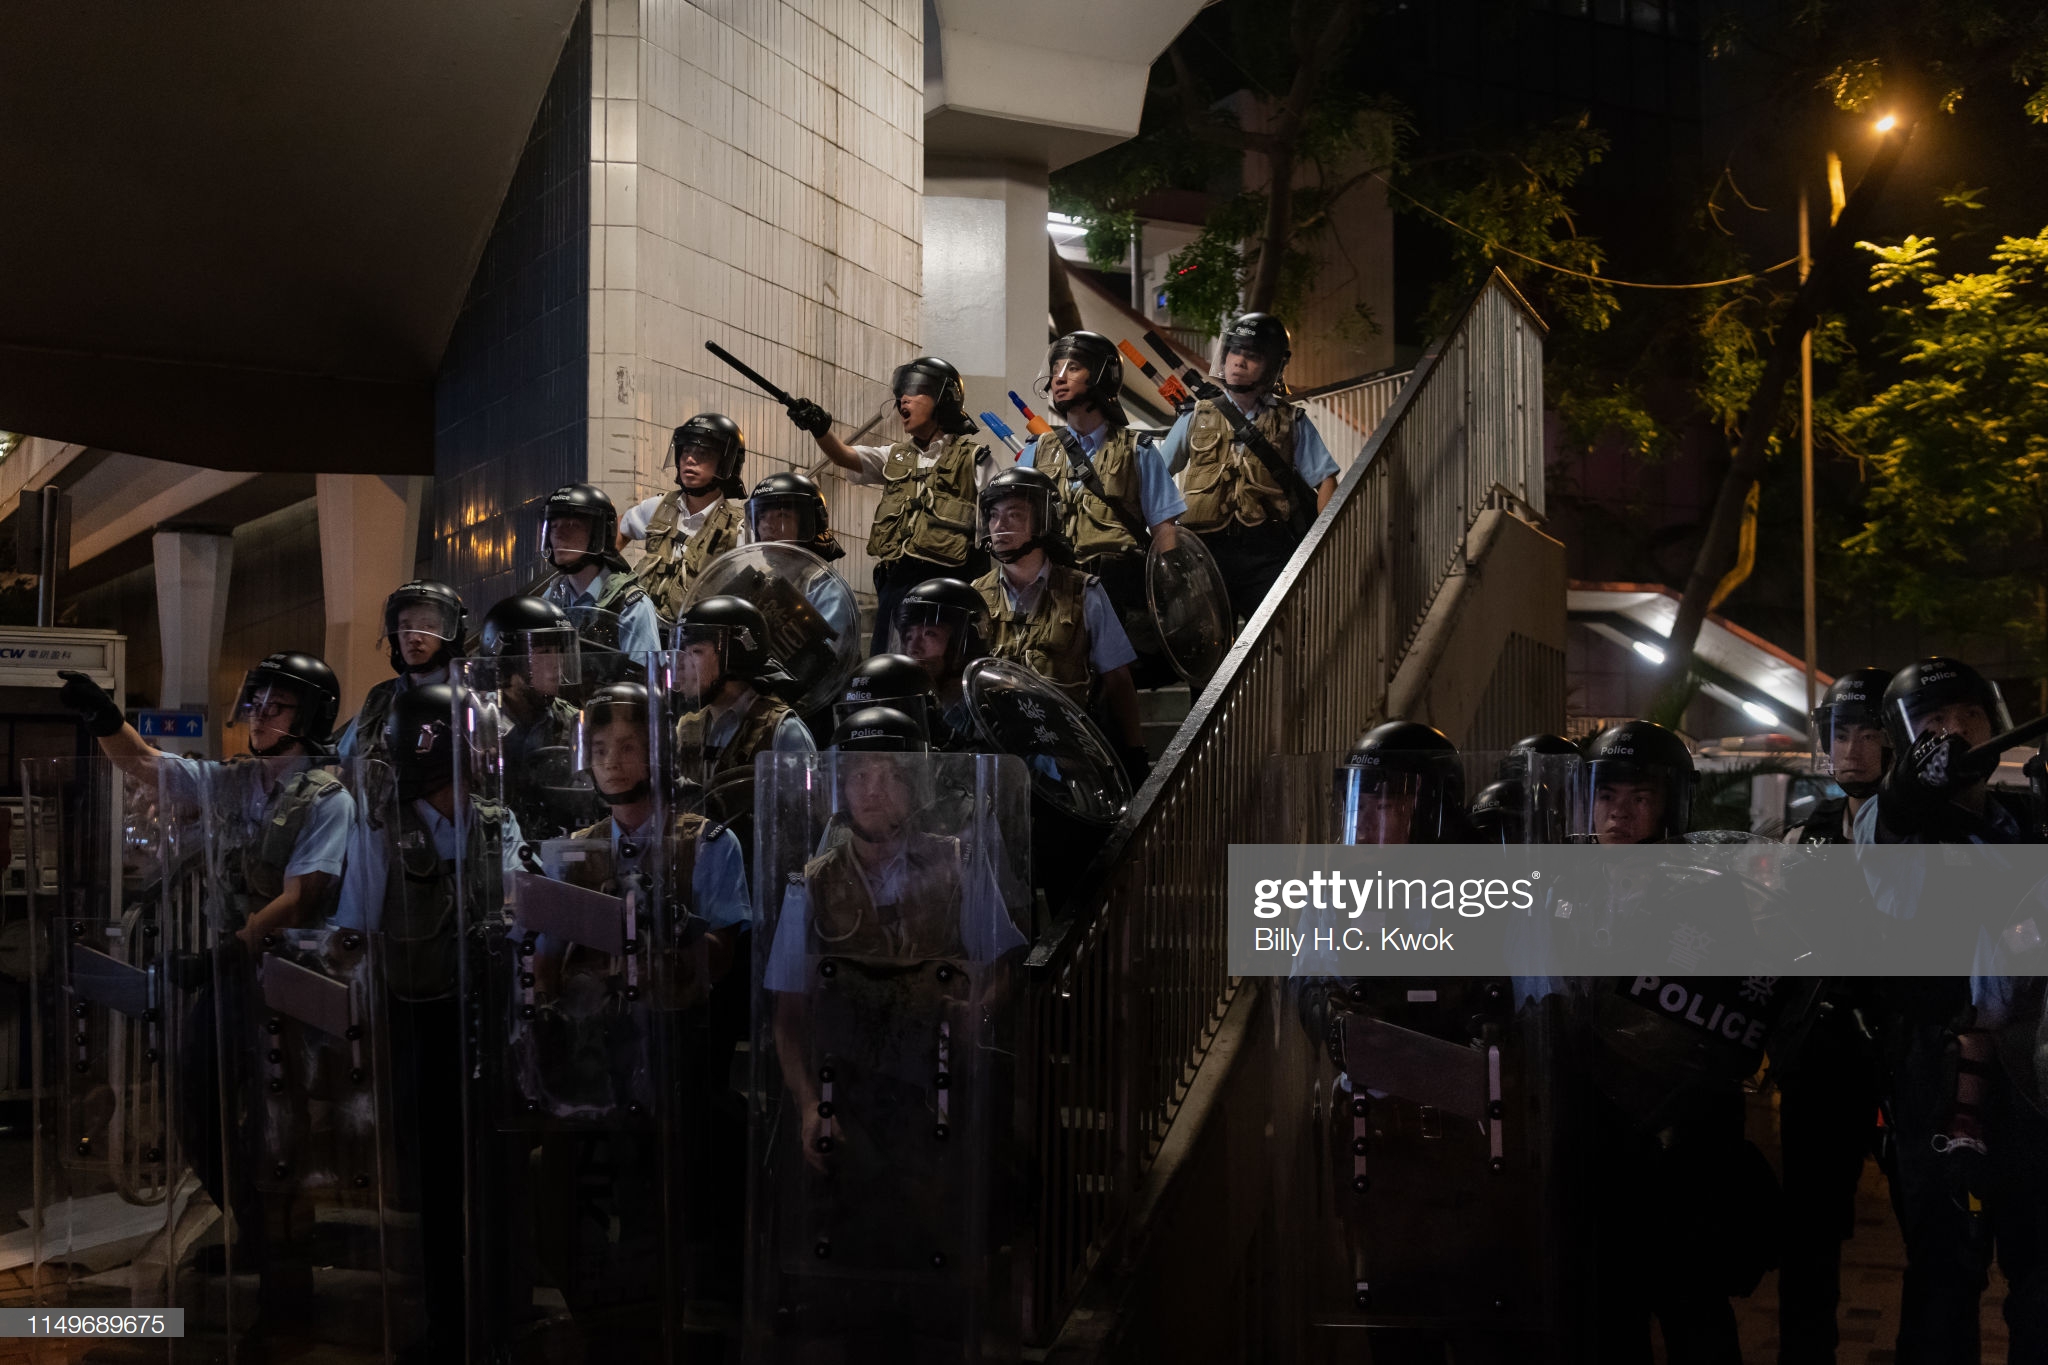 gettyimages-1149689675-2048x2048.jpg